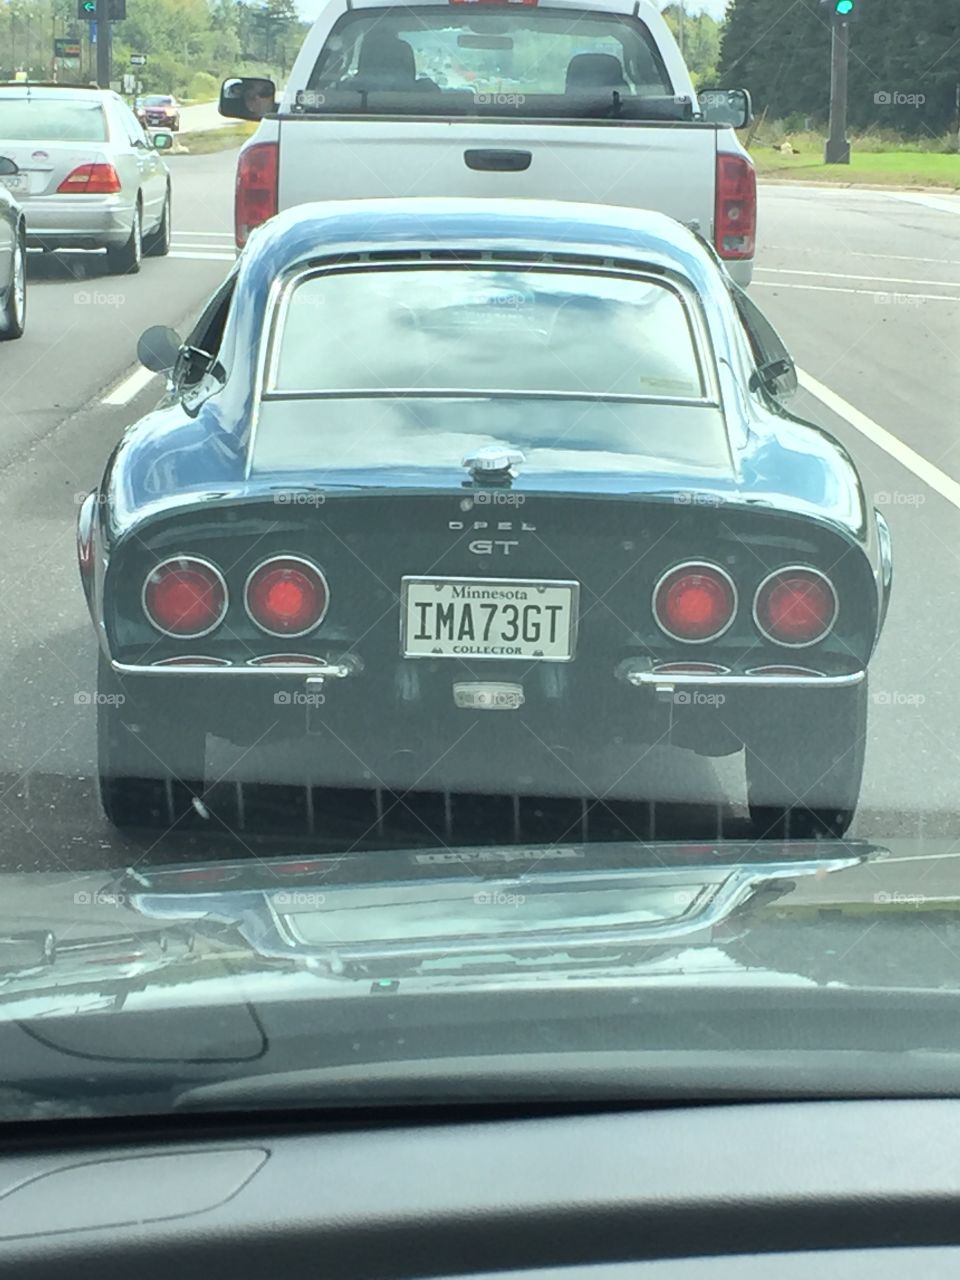 Saw this beauty in front of me one day